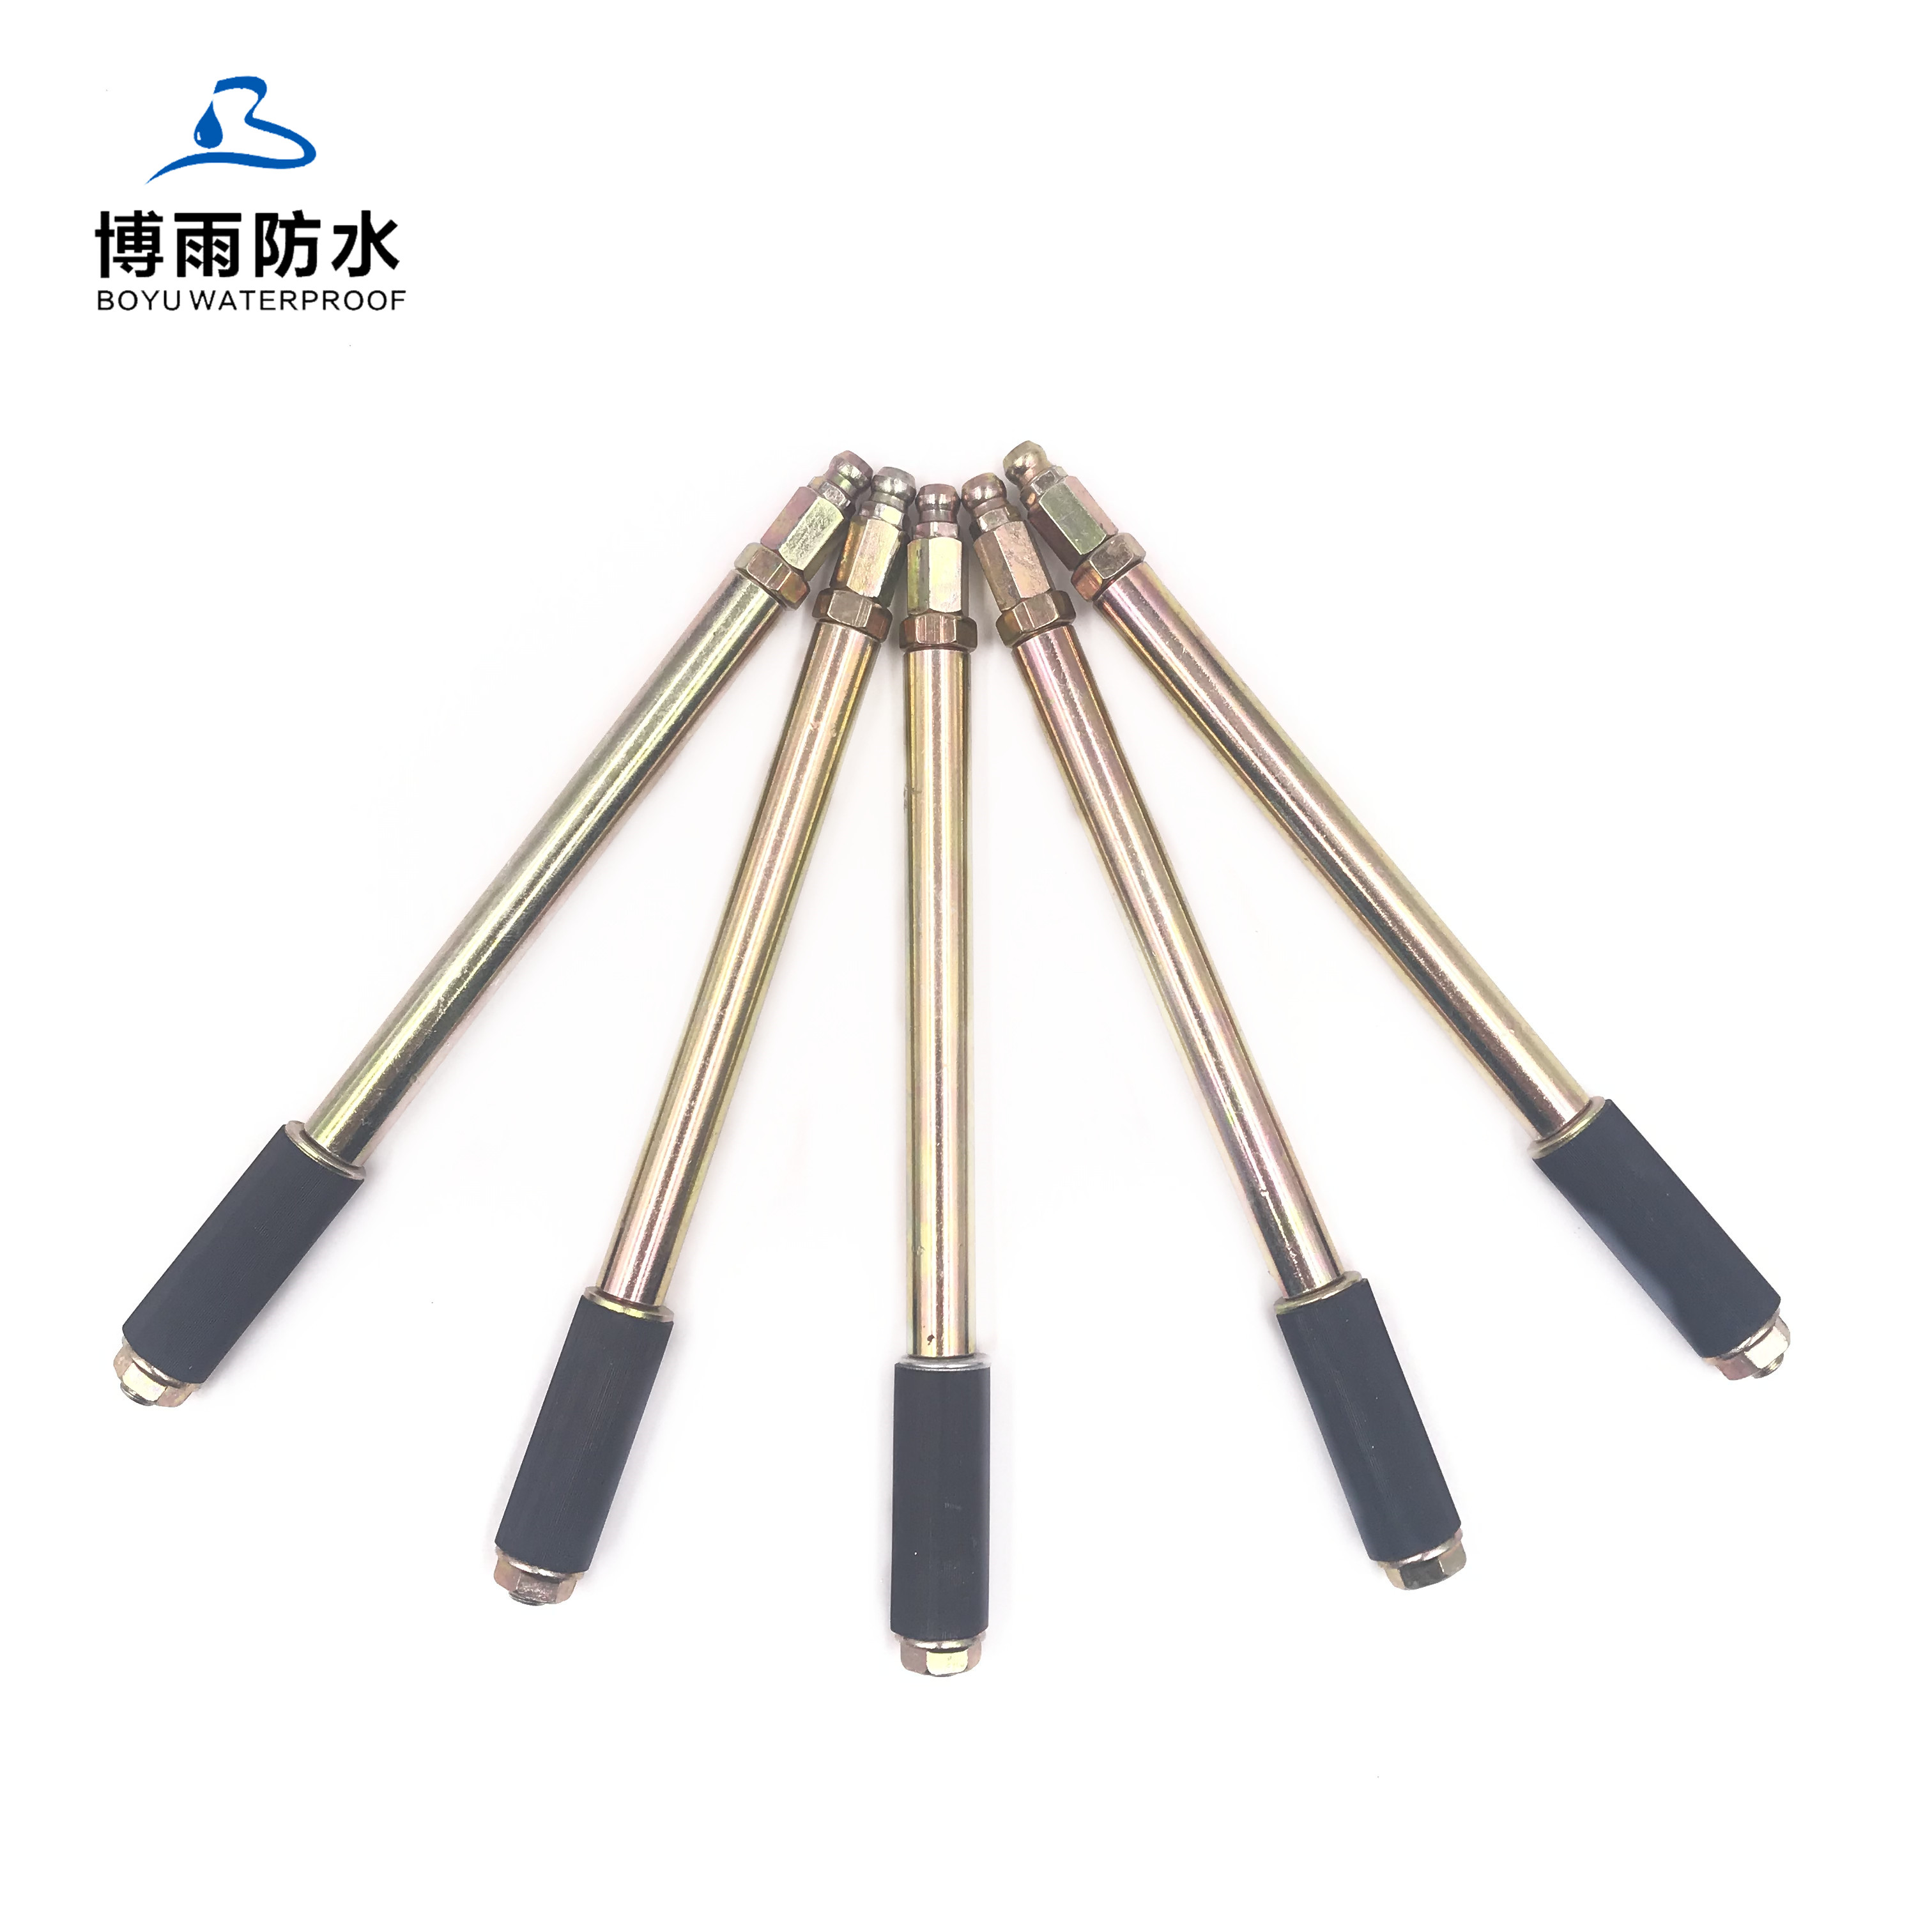 Brass color Injection Packers steel 13*150mm A15 grouting injection packers